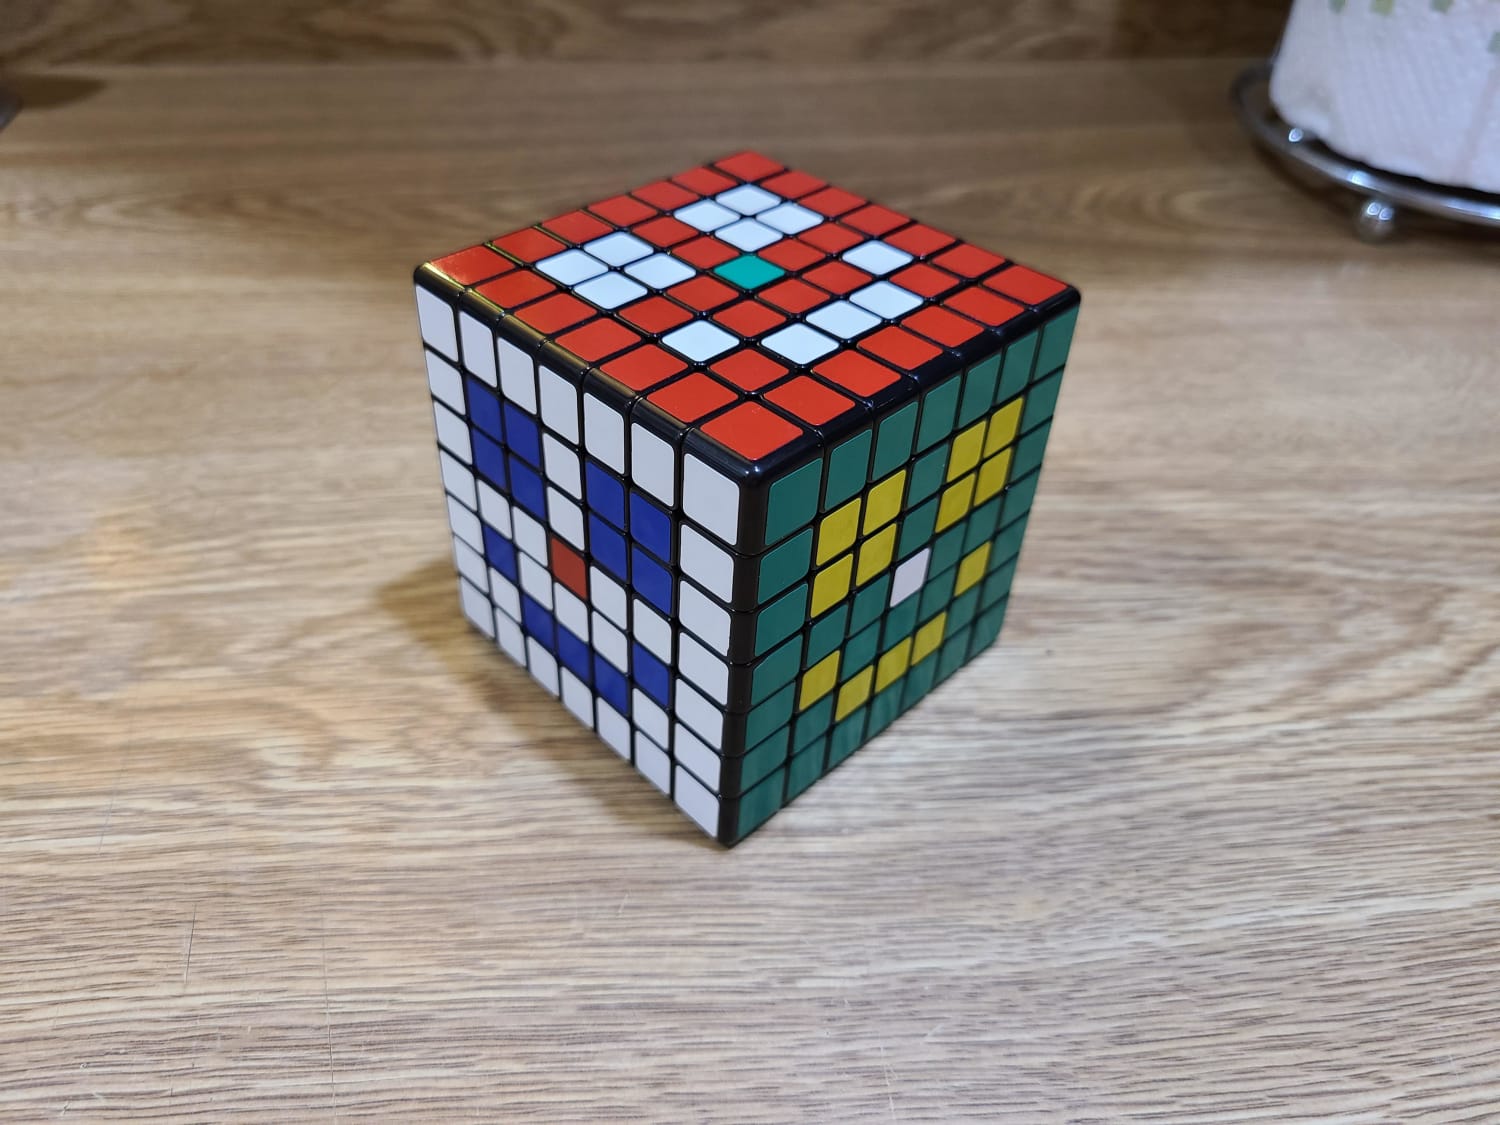 A friend of mine "solved" a clown face into each side of this giant Rubik's cube.